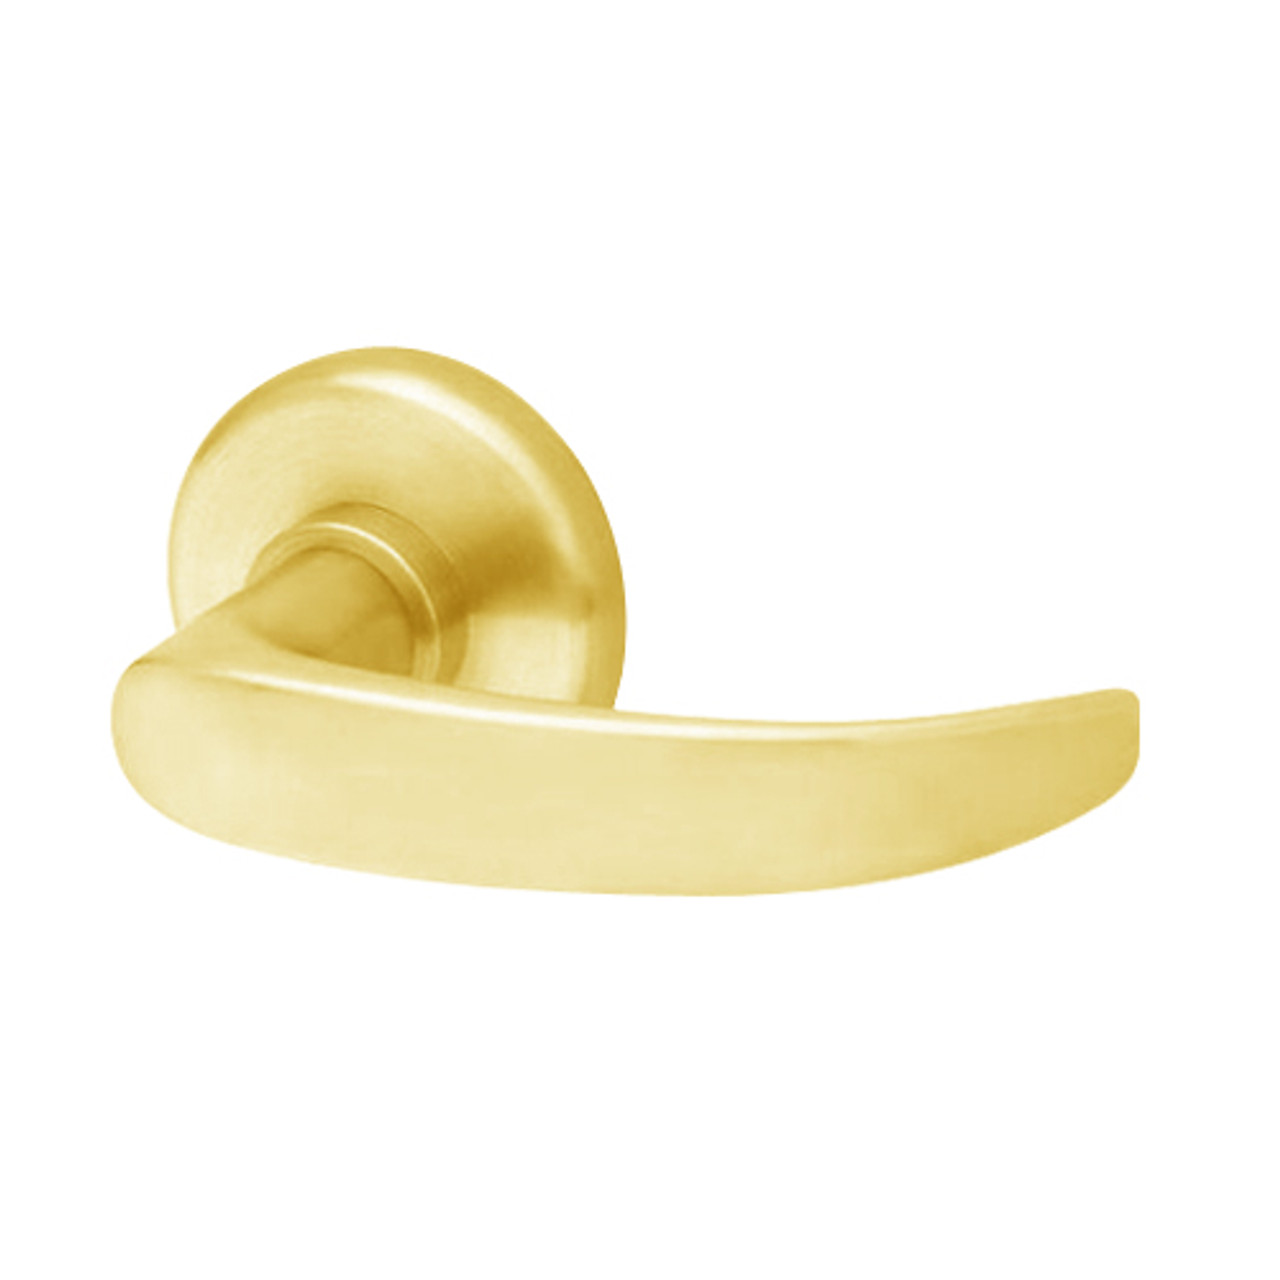 40HTKIS314S605 Best 40H Series Trim Kits Inside Lever w/ Cylinder with Curved Return Style in Bright Brass